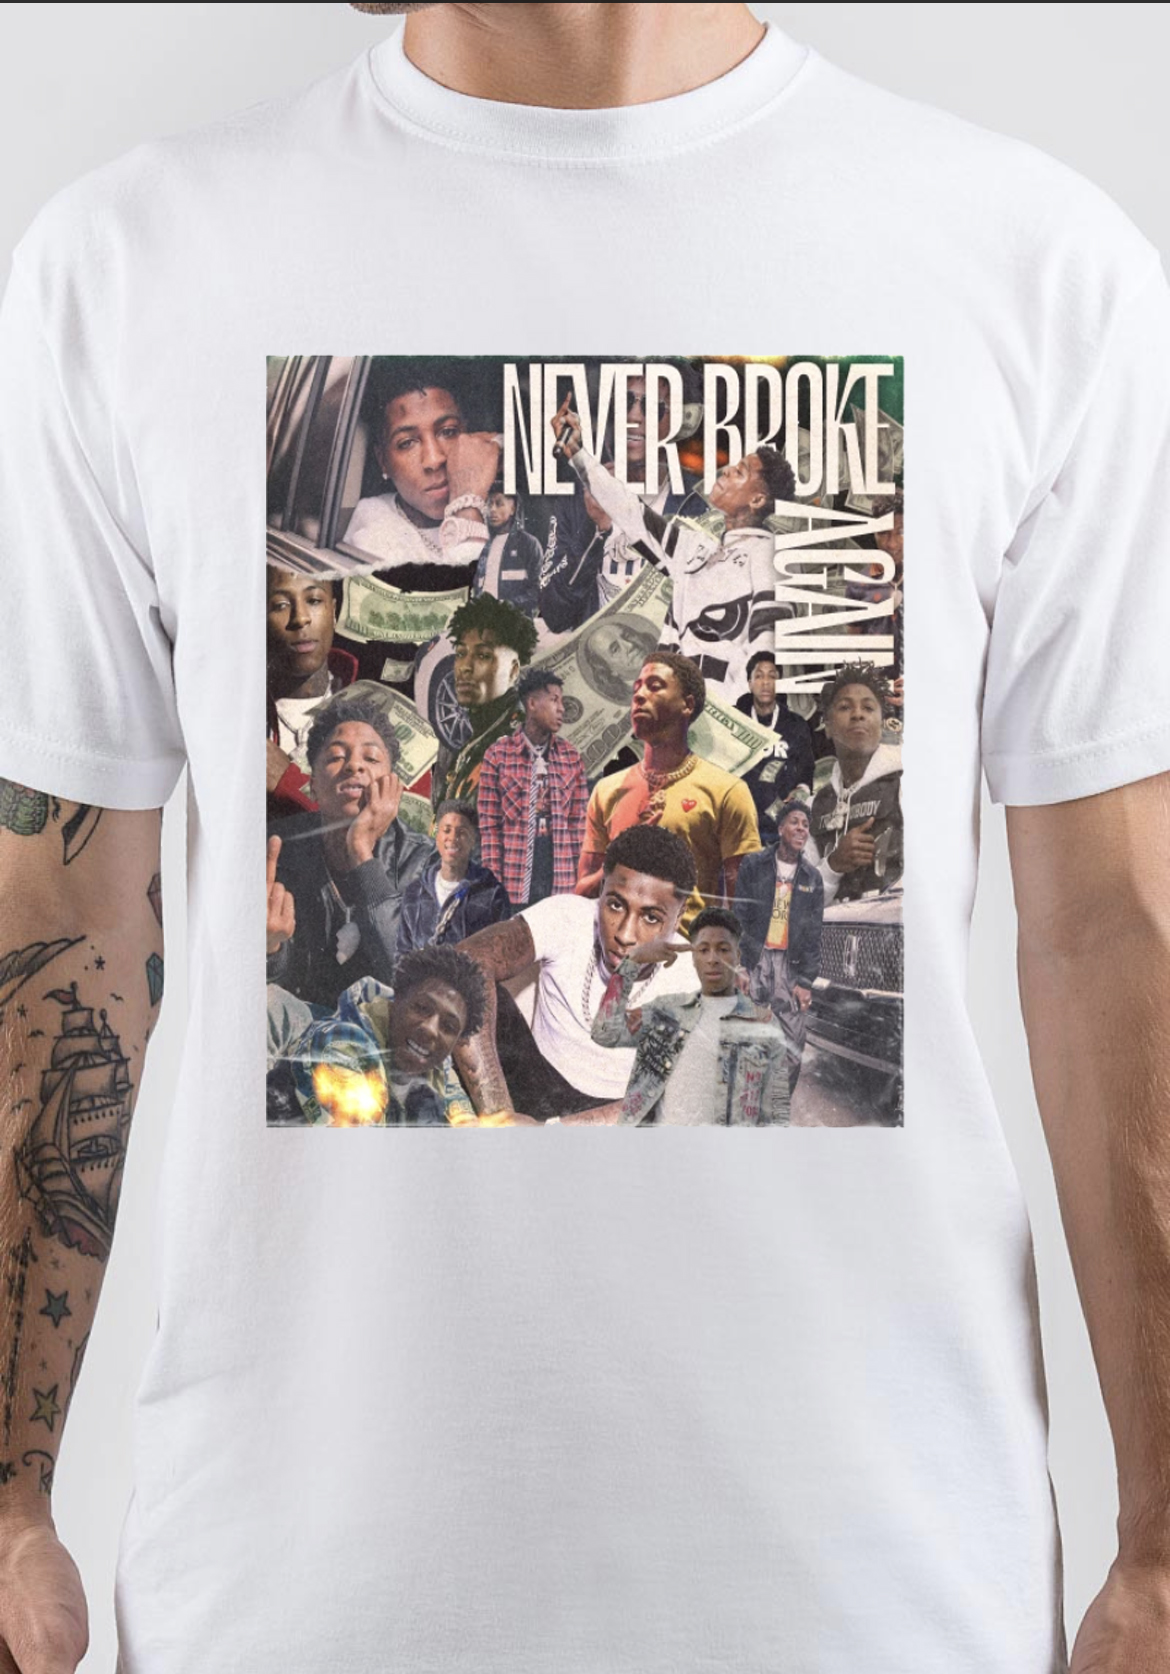 NBA YoungBoy T-Shirt And Merchandise